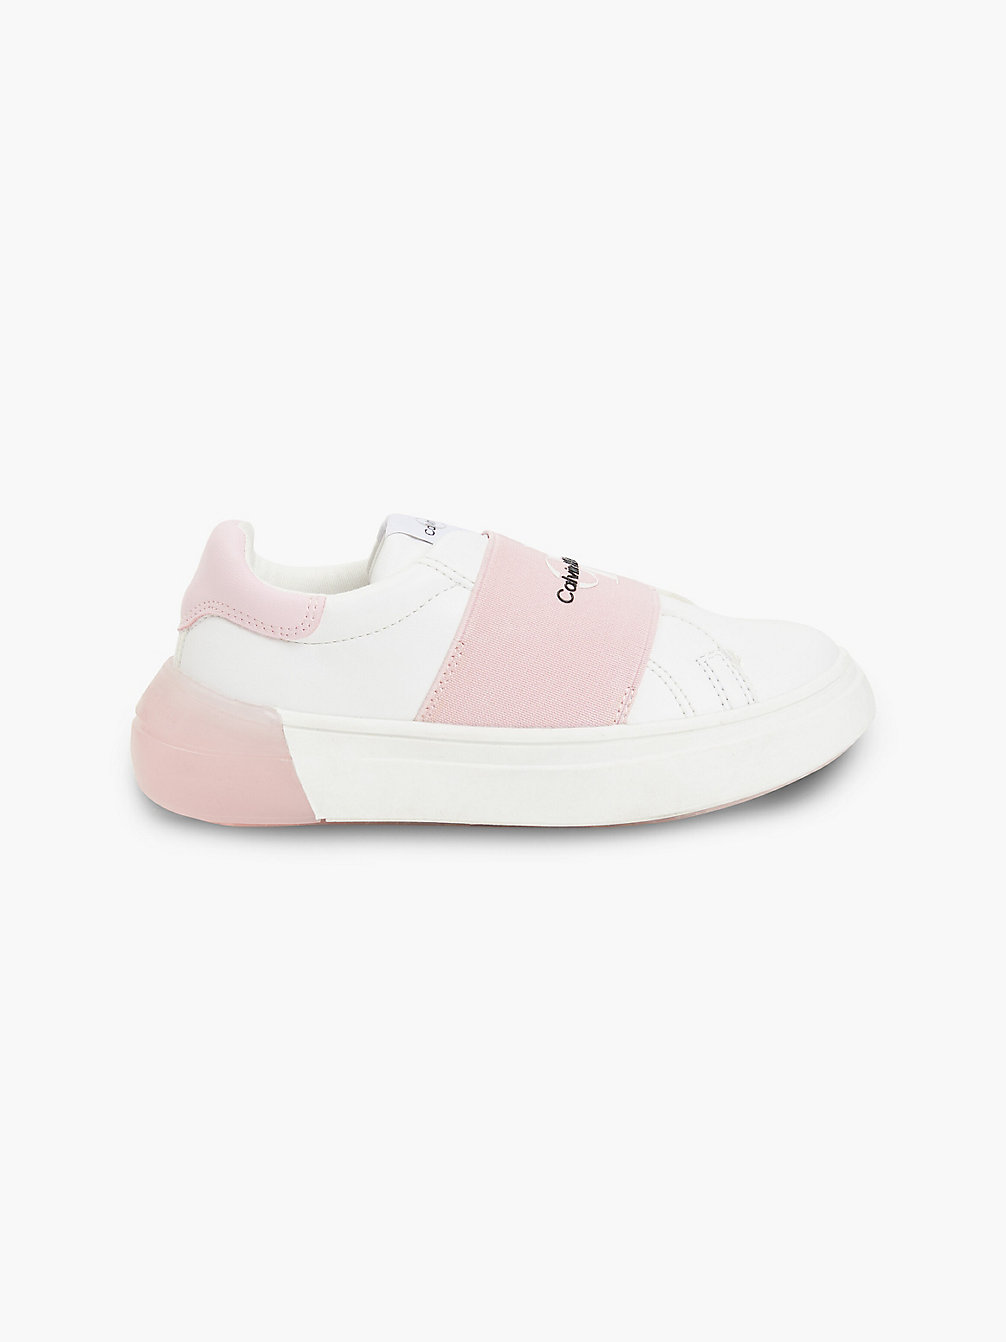 WHITE/PINK Recycled Trainers undefined girls Calvin Klein